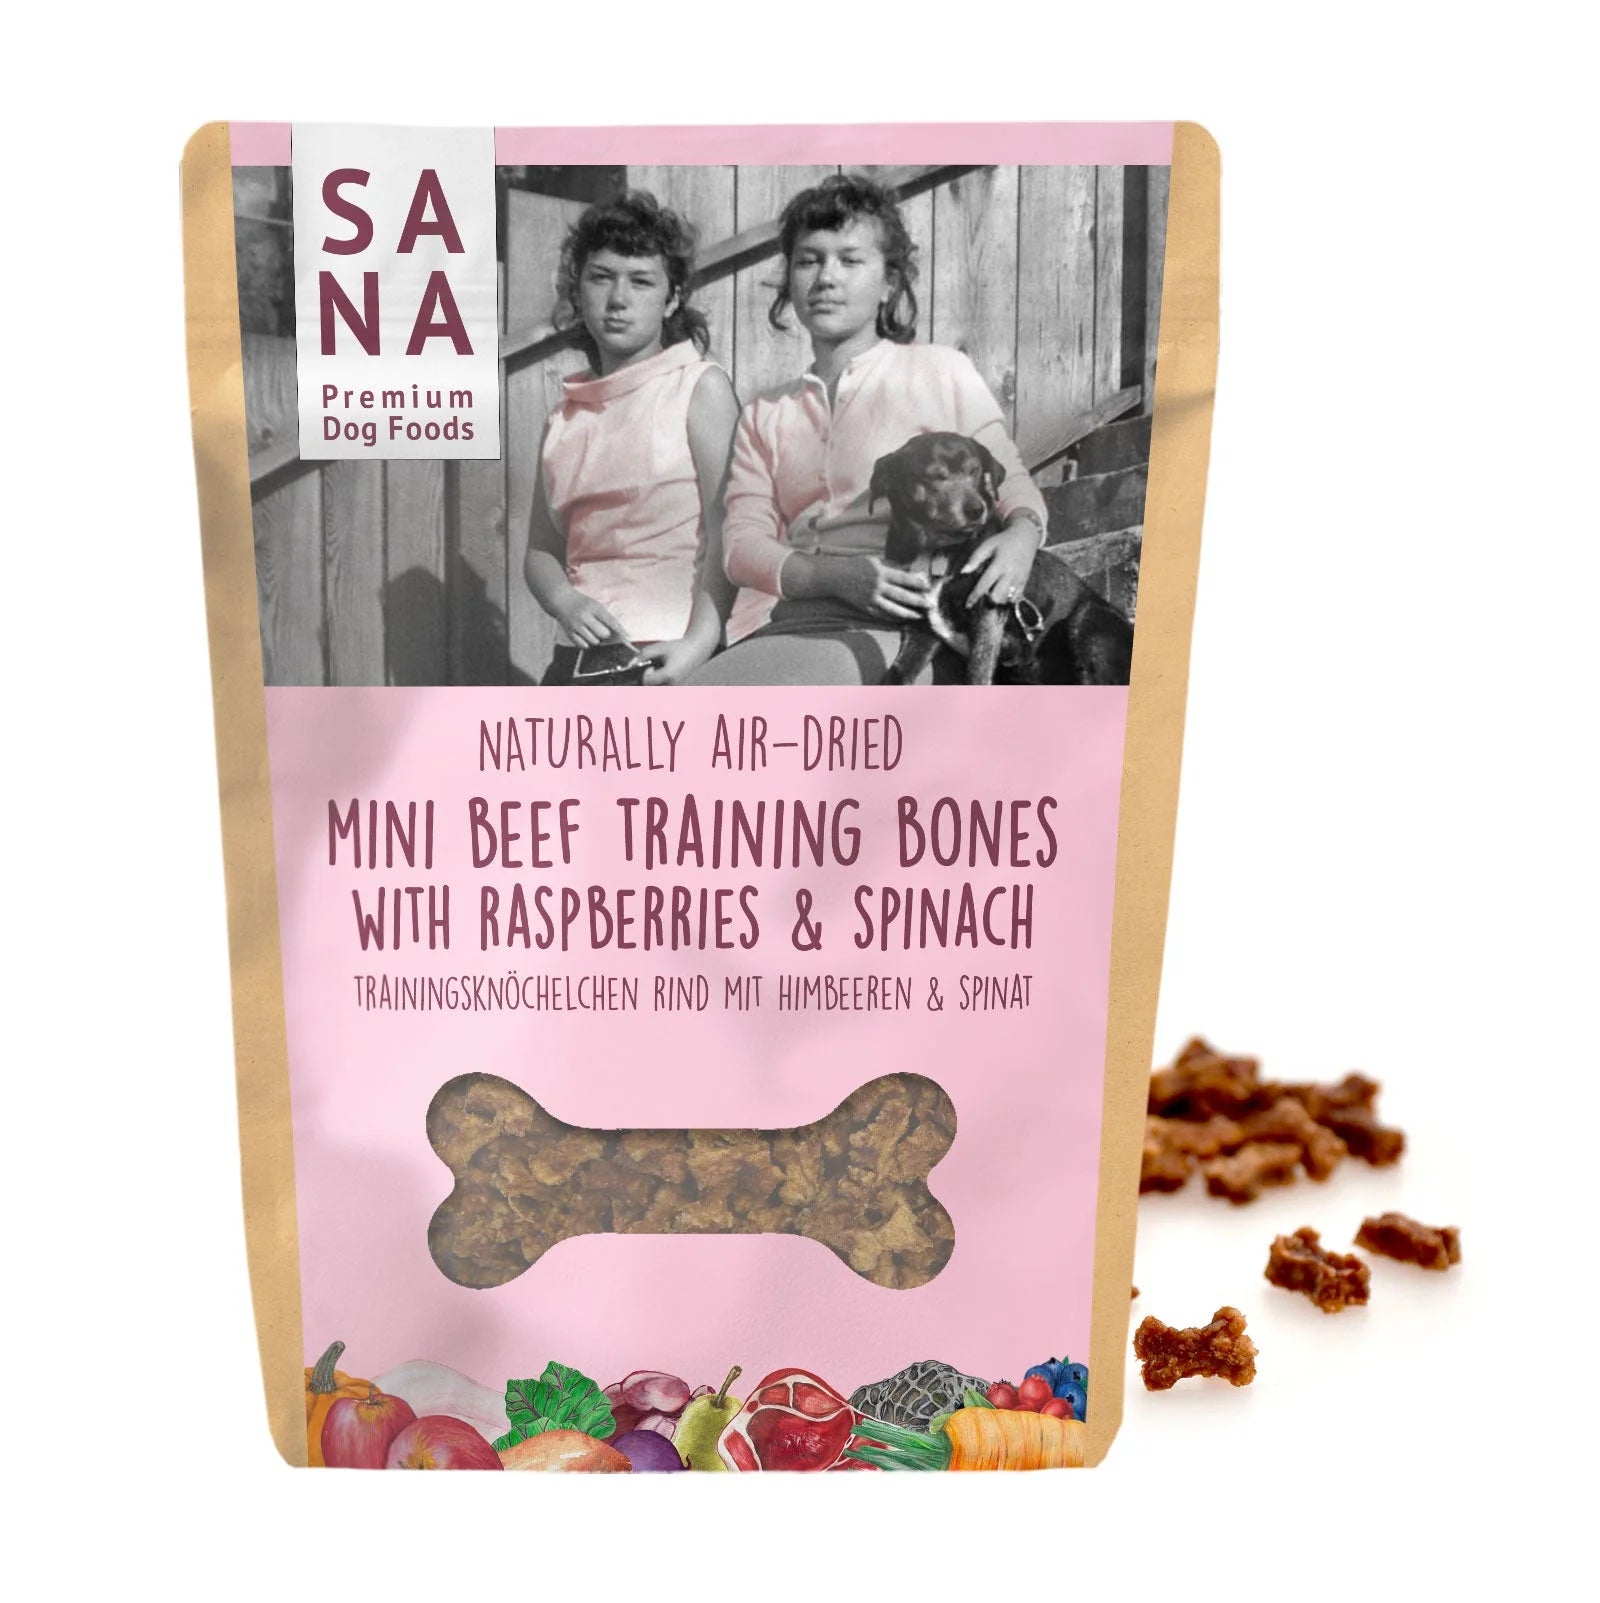 SANA mini beef training bones with raspberries and spinach. training treats for dogs